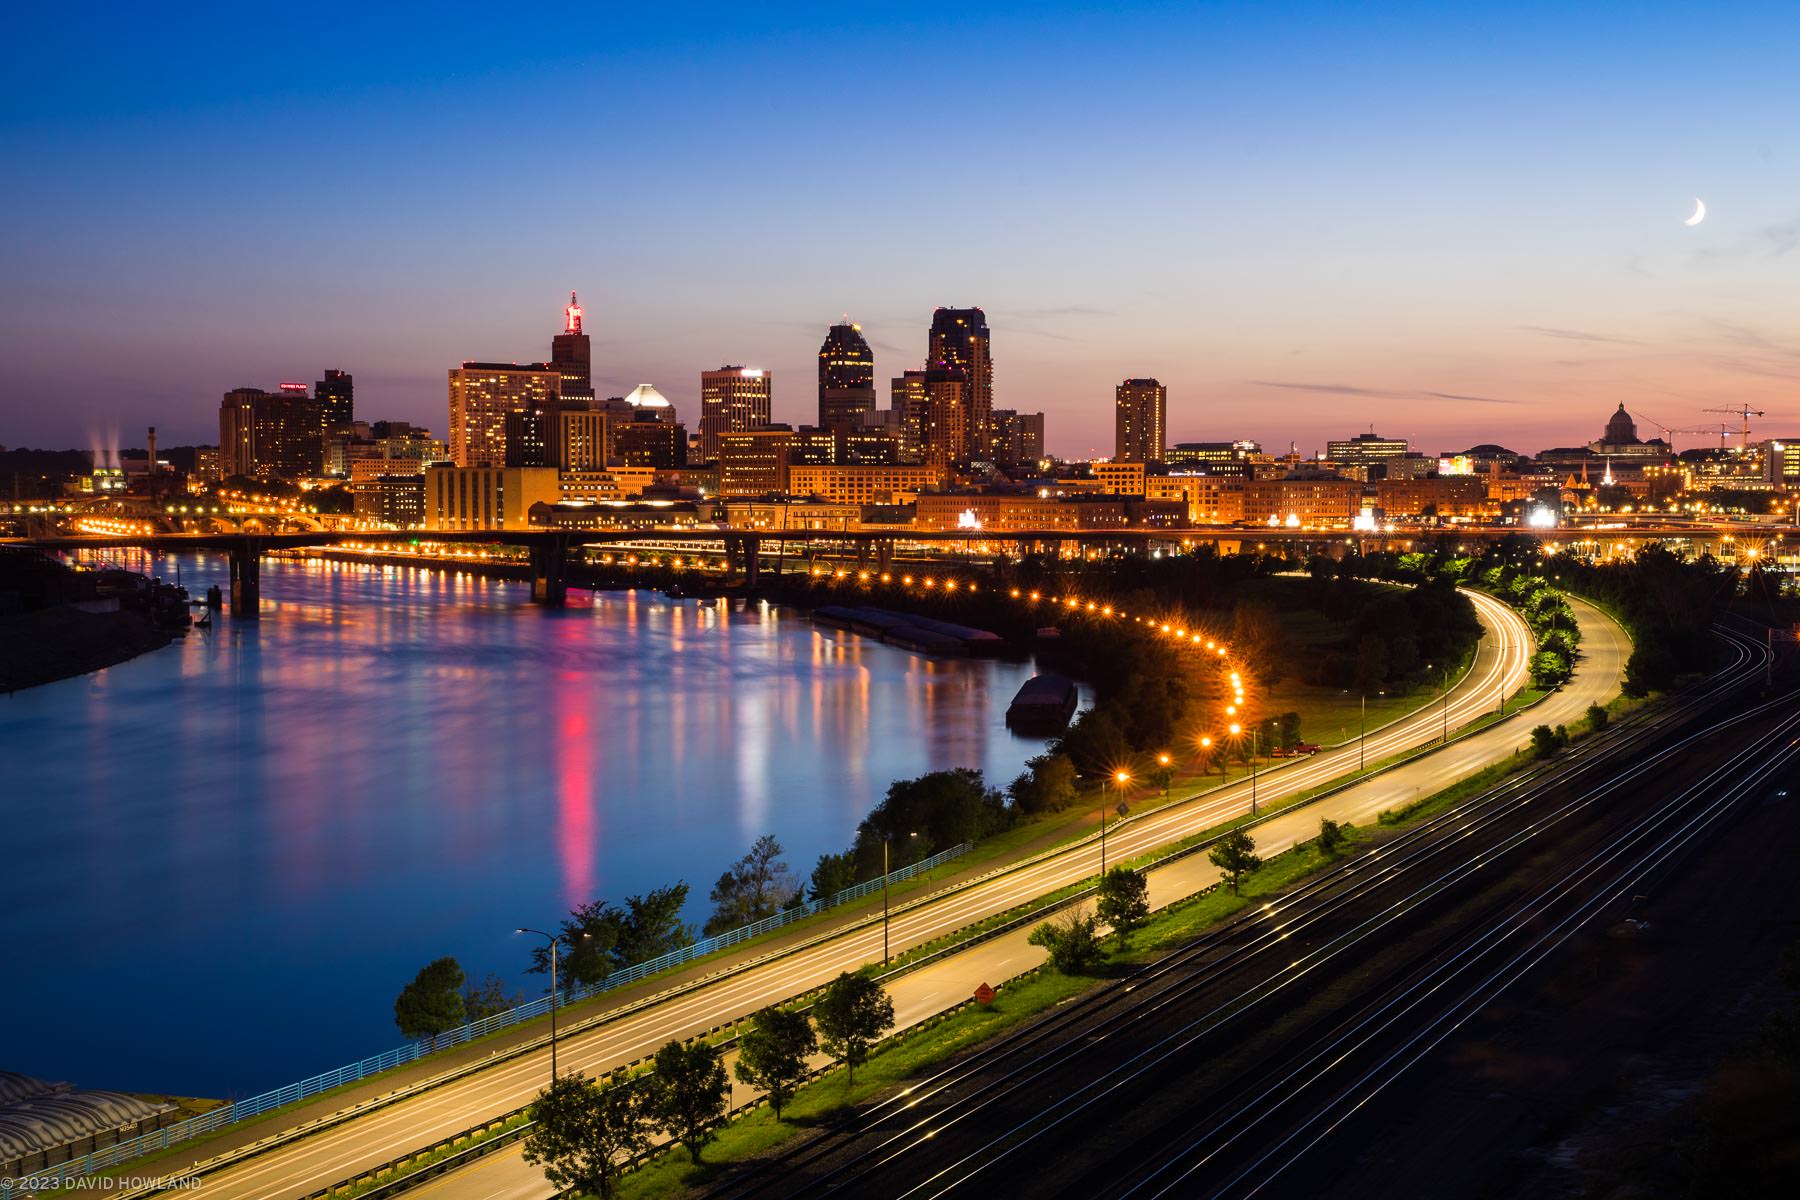 A photo of the skyline of Saint Paul, Minnesota at sunset with the Mississippi River, a road, and railroad tracks curving through the foreground